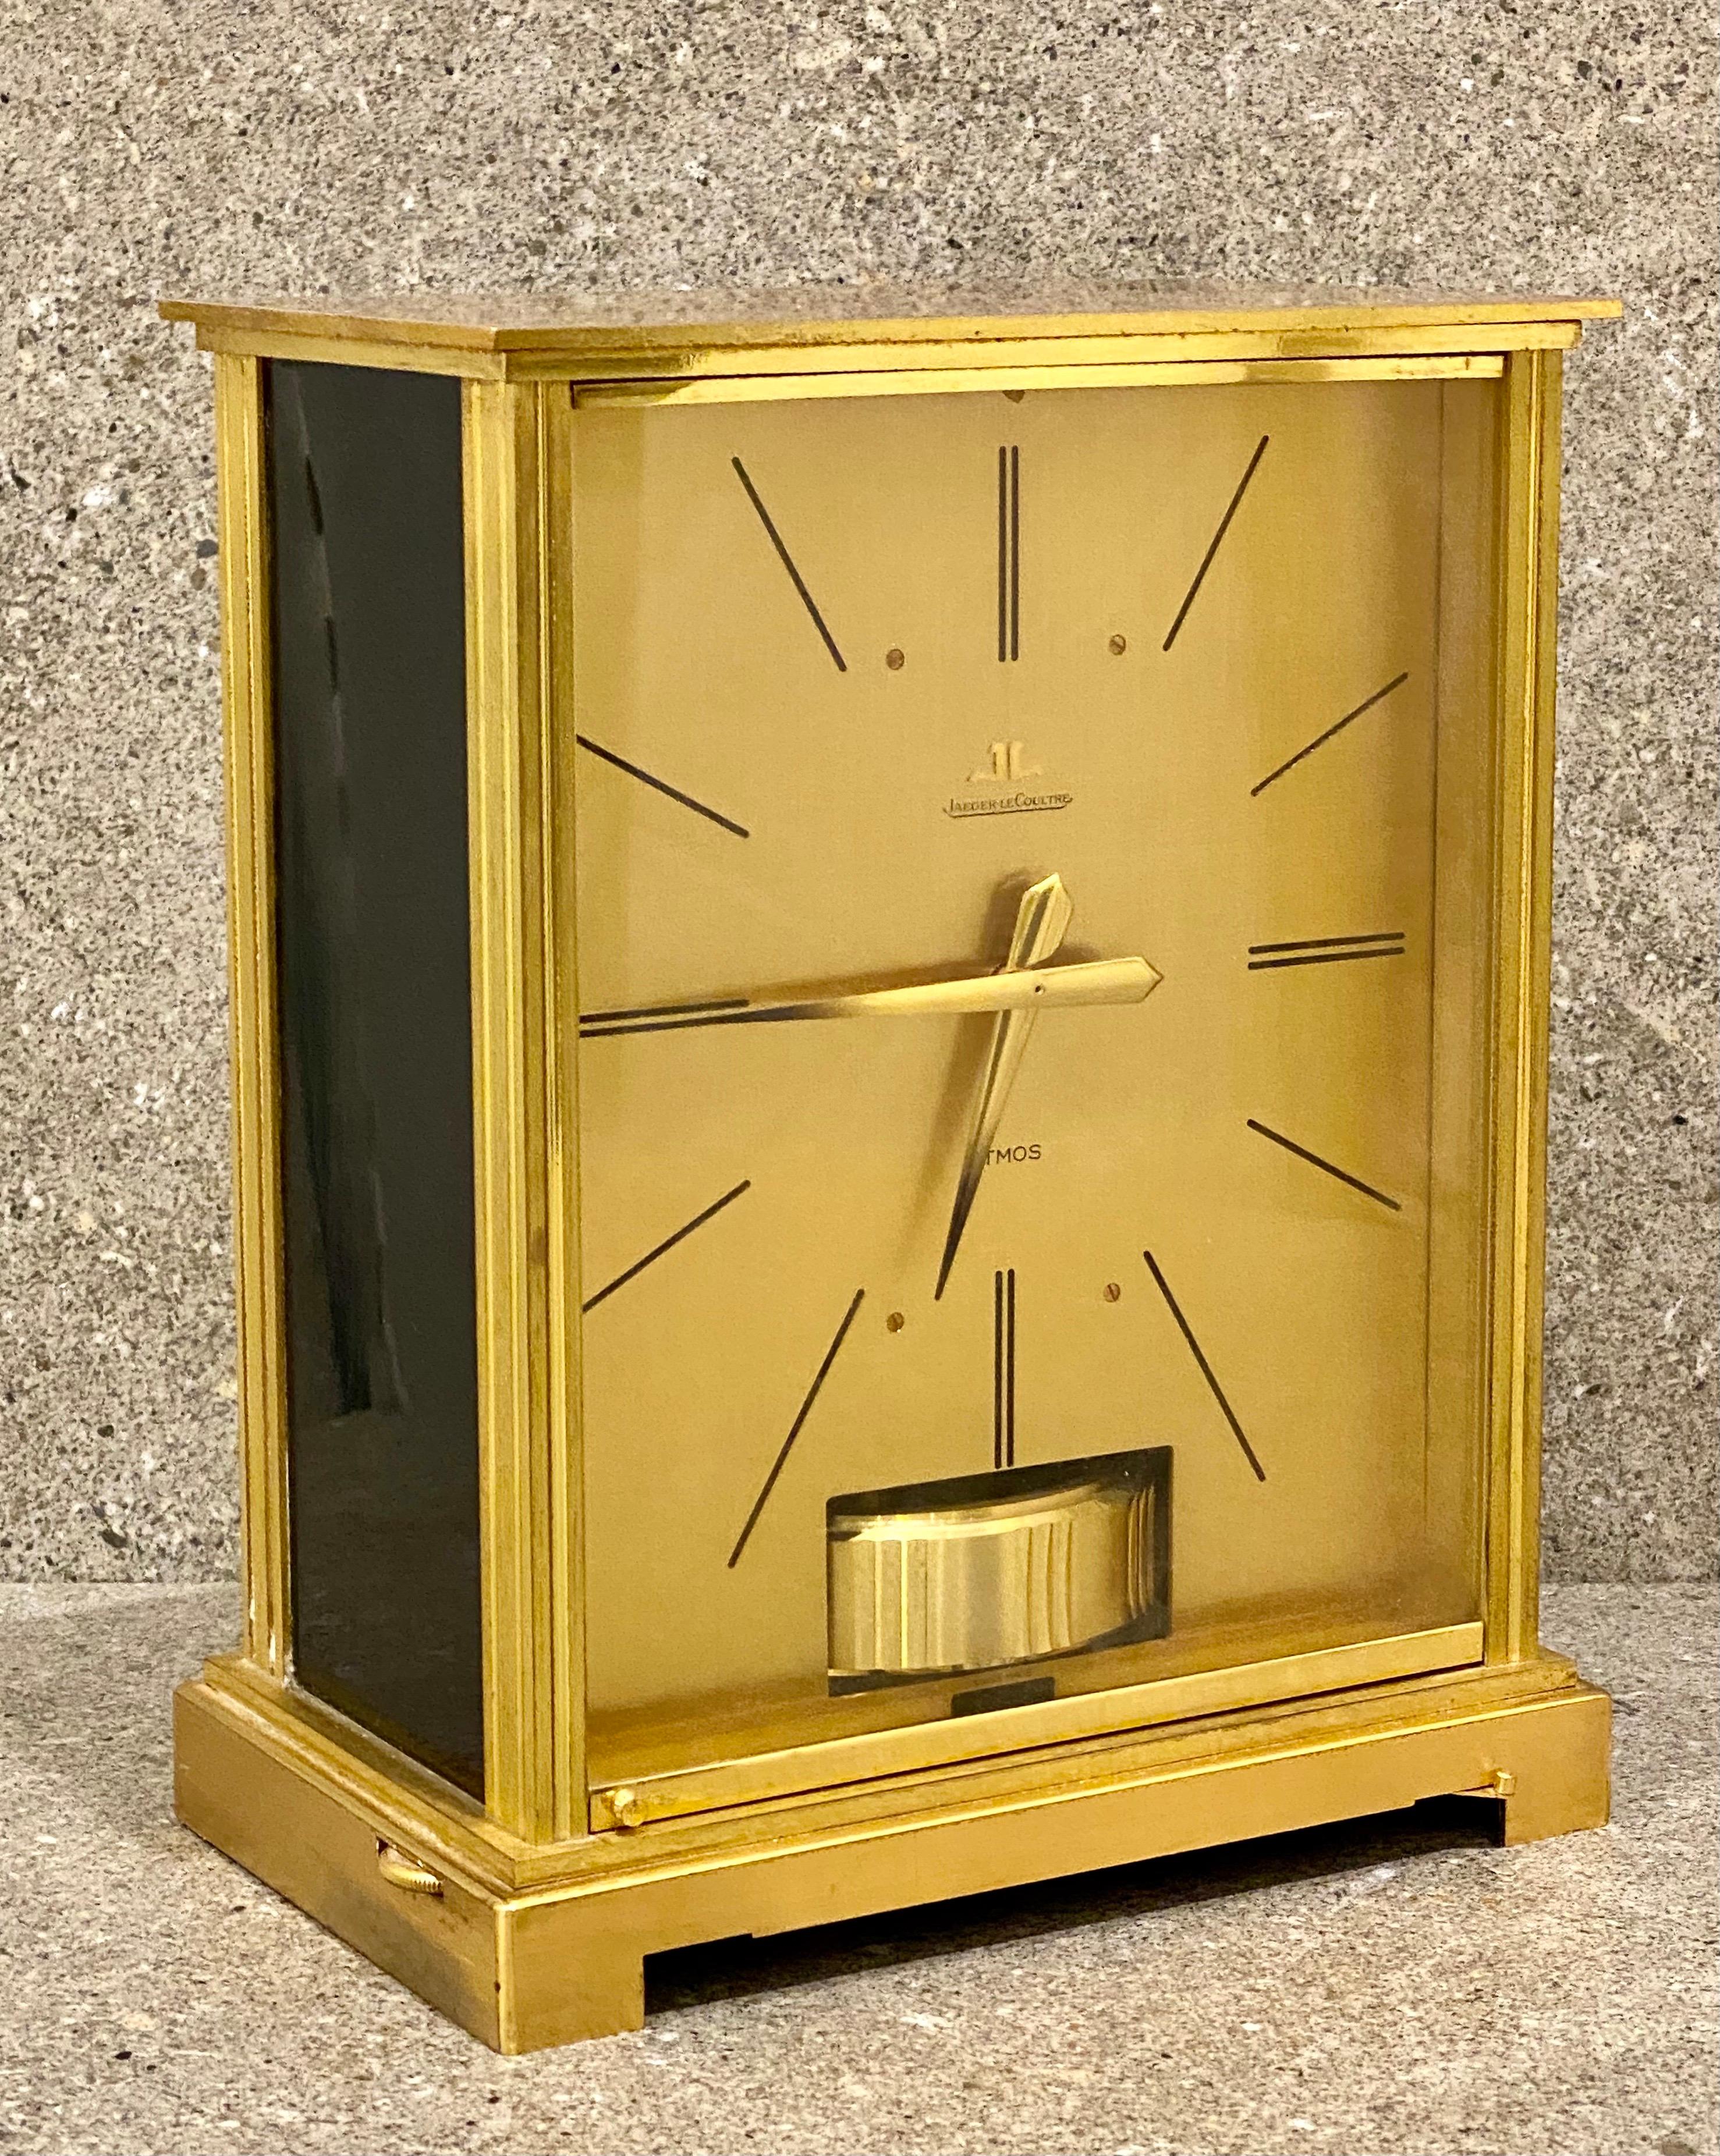 A nice example of A Jaeger Le Coultre Atmos clock, Embassy, signed Jaeger Le Coultre, , base with stop lever, dial with Roman chapter ring and visible balance wheel below, 22cm high, with Jaeger Le Coultre booklet and original box.
   